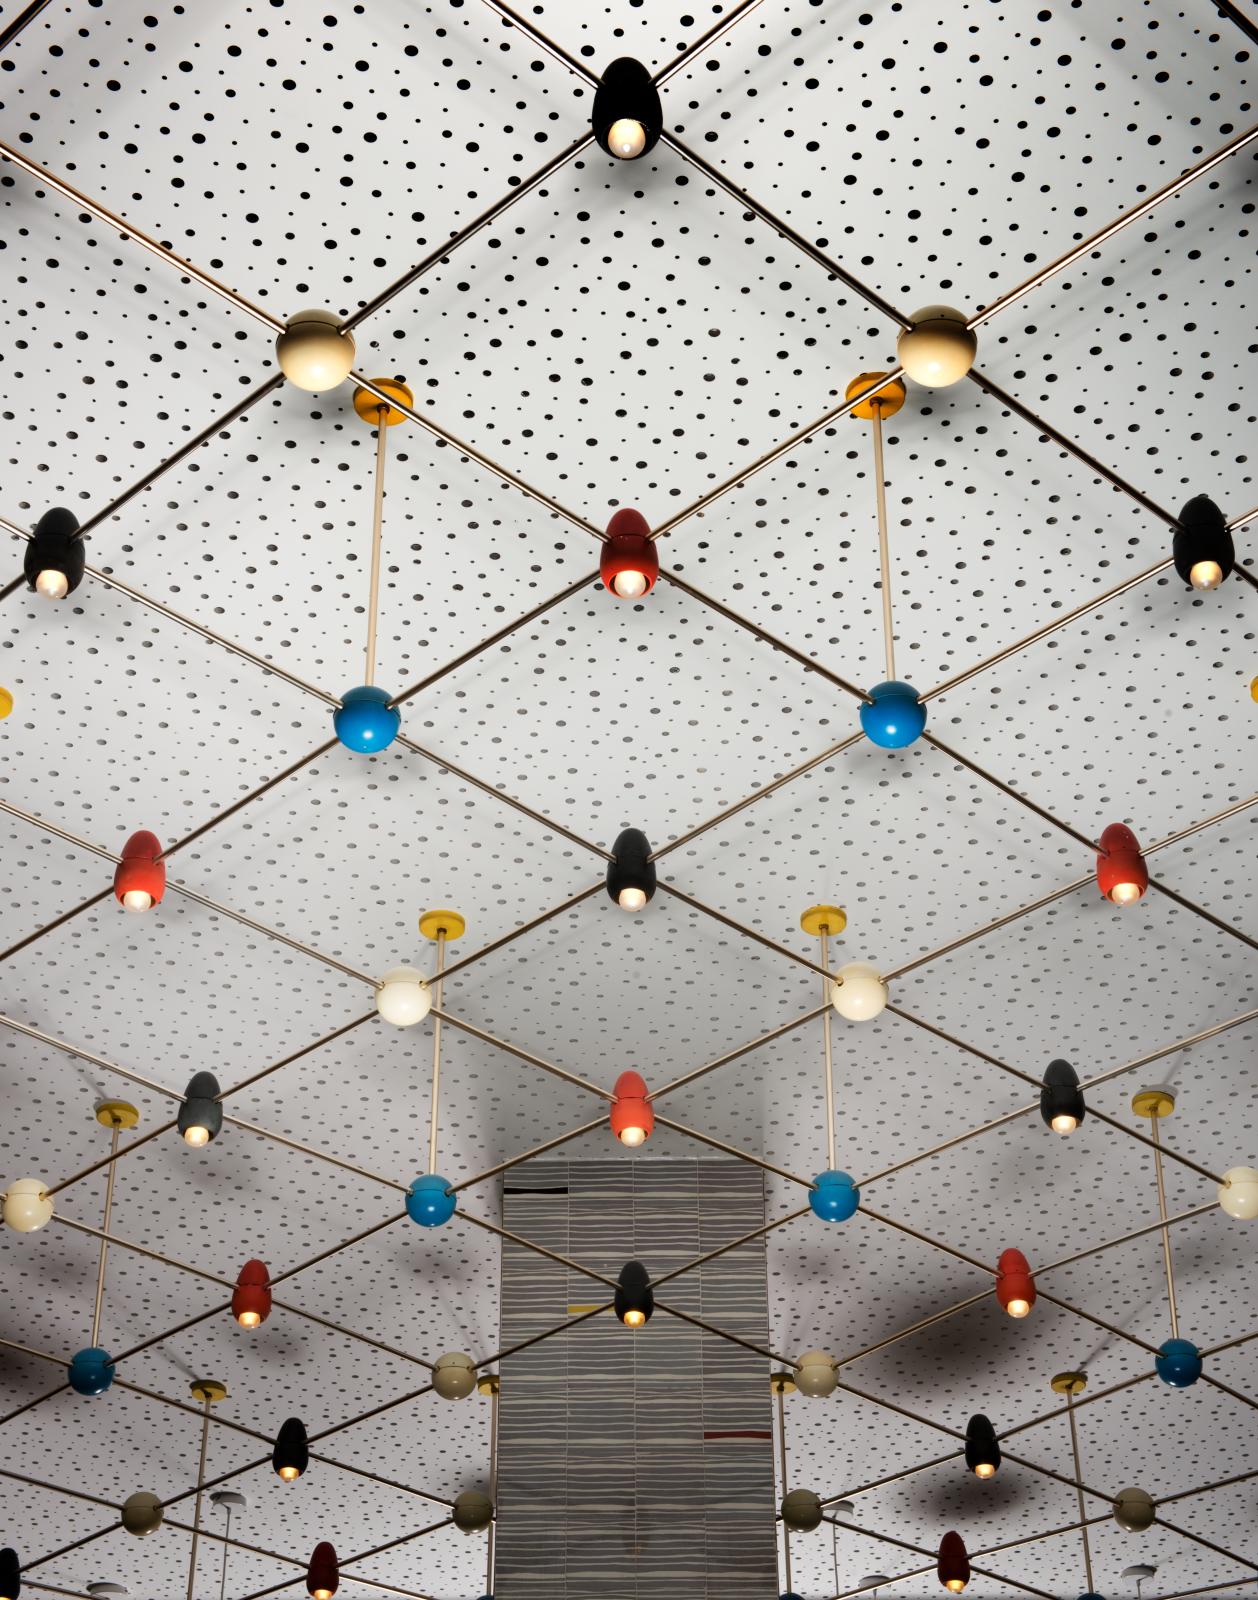 white lights with multi coloured lampshades suspended from a ceiling. The ceiling is white with dark speckles and square patterns